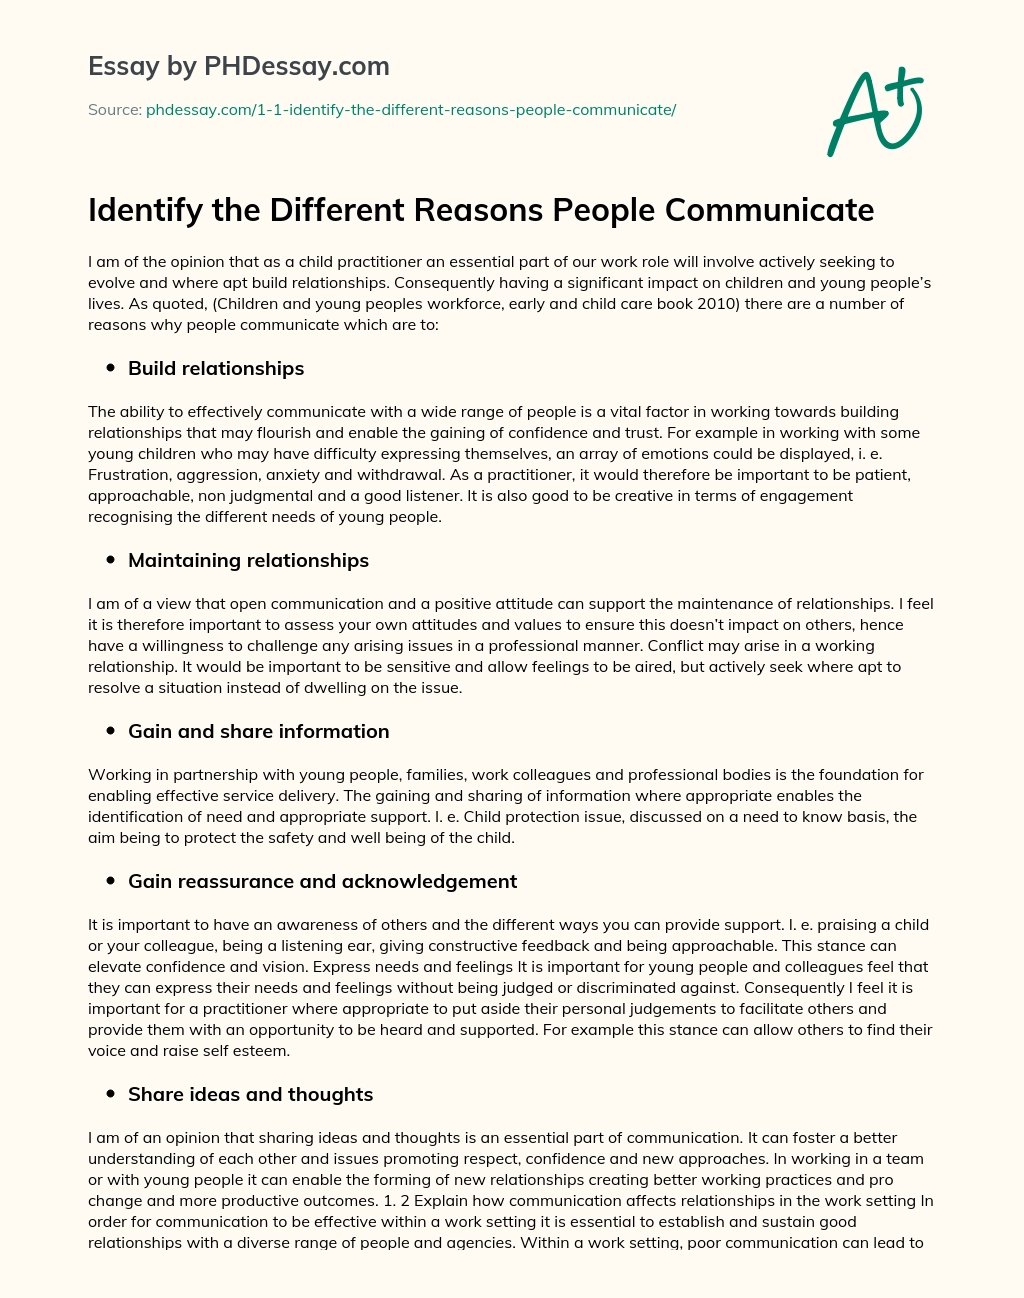 Identify the Different Reasons People Communicate essay